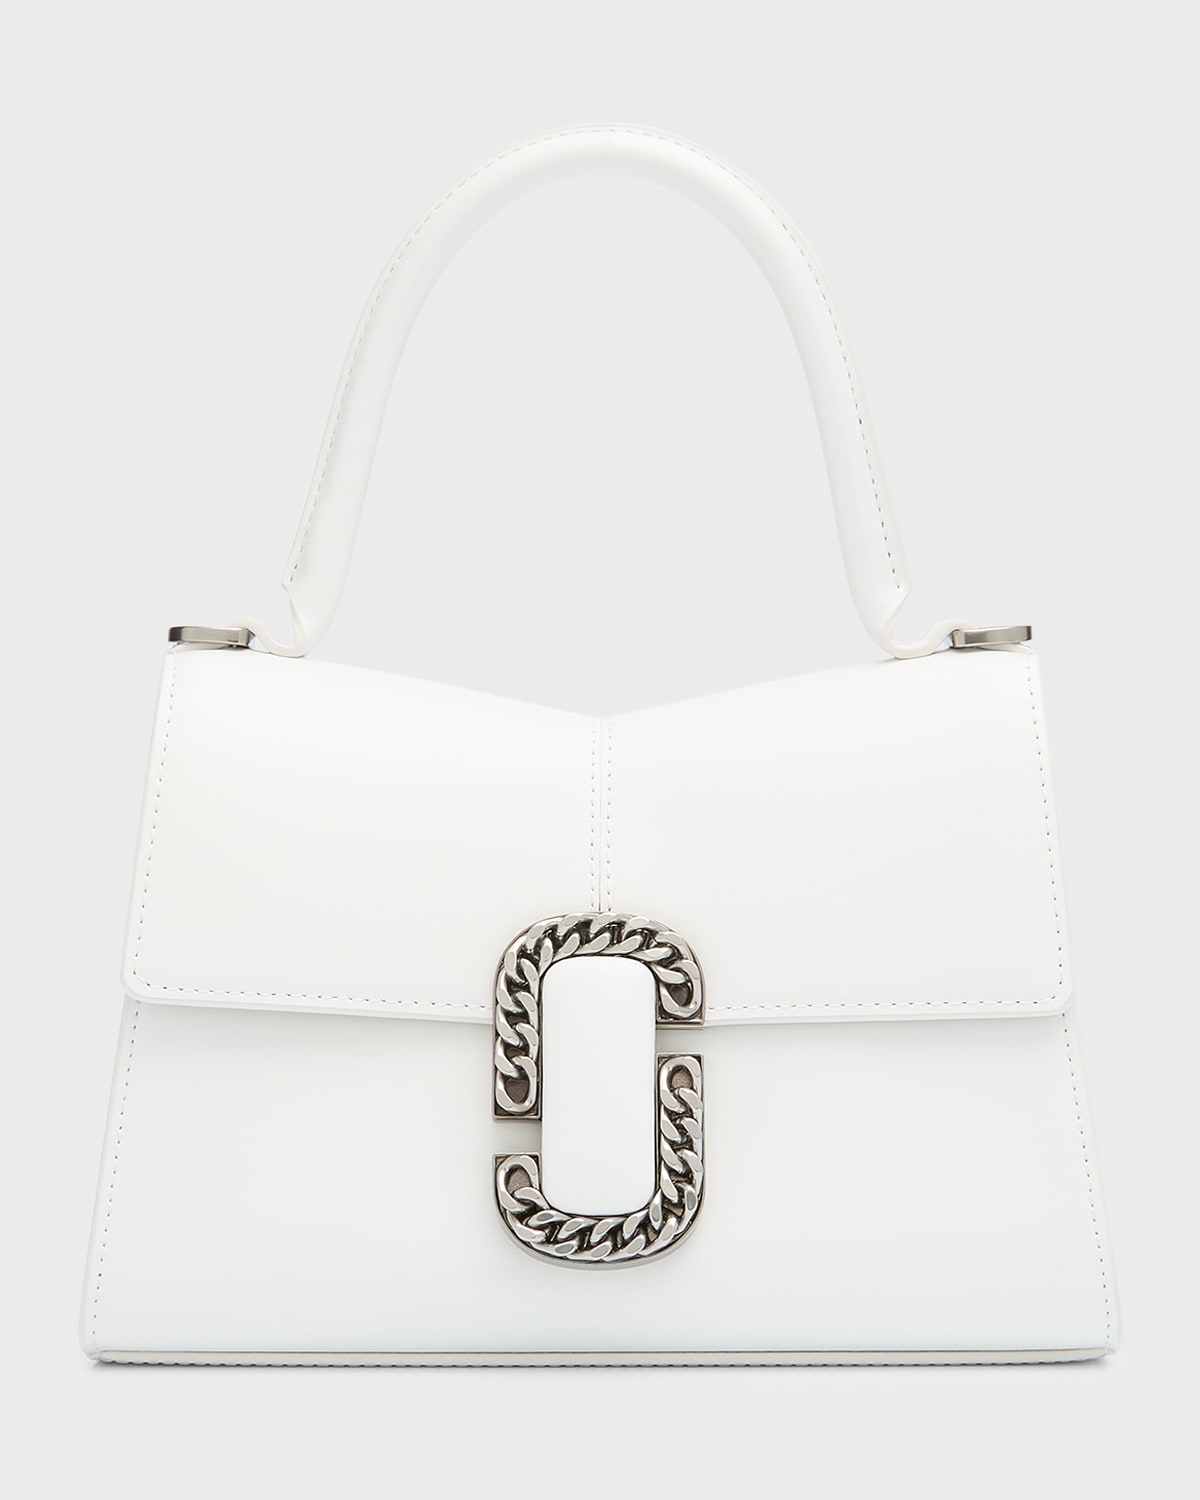 MARC JACOBS THE ST. MARC TOP HANDLE